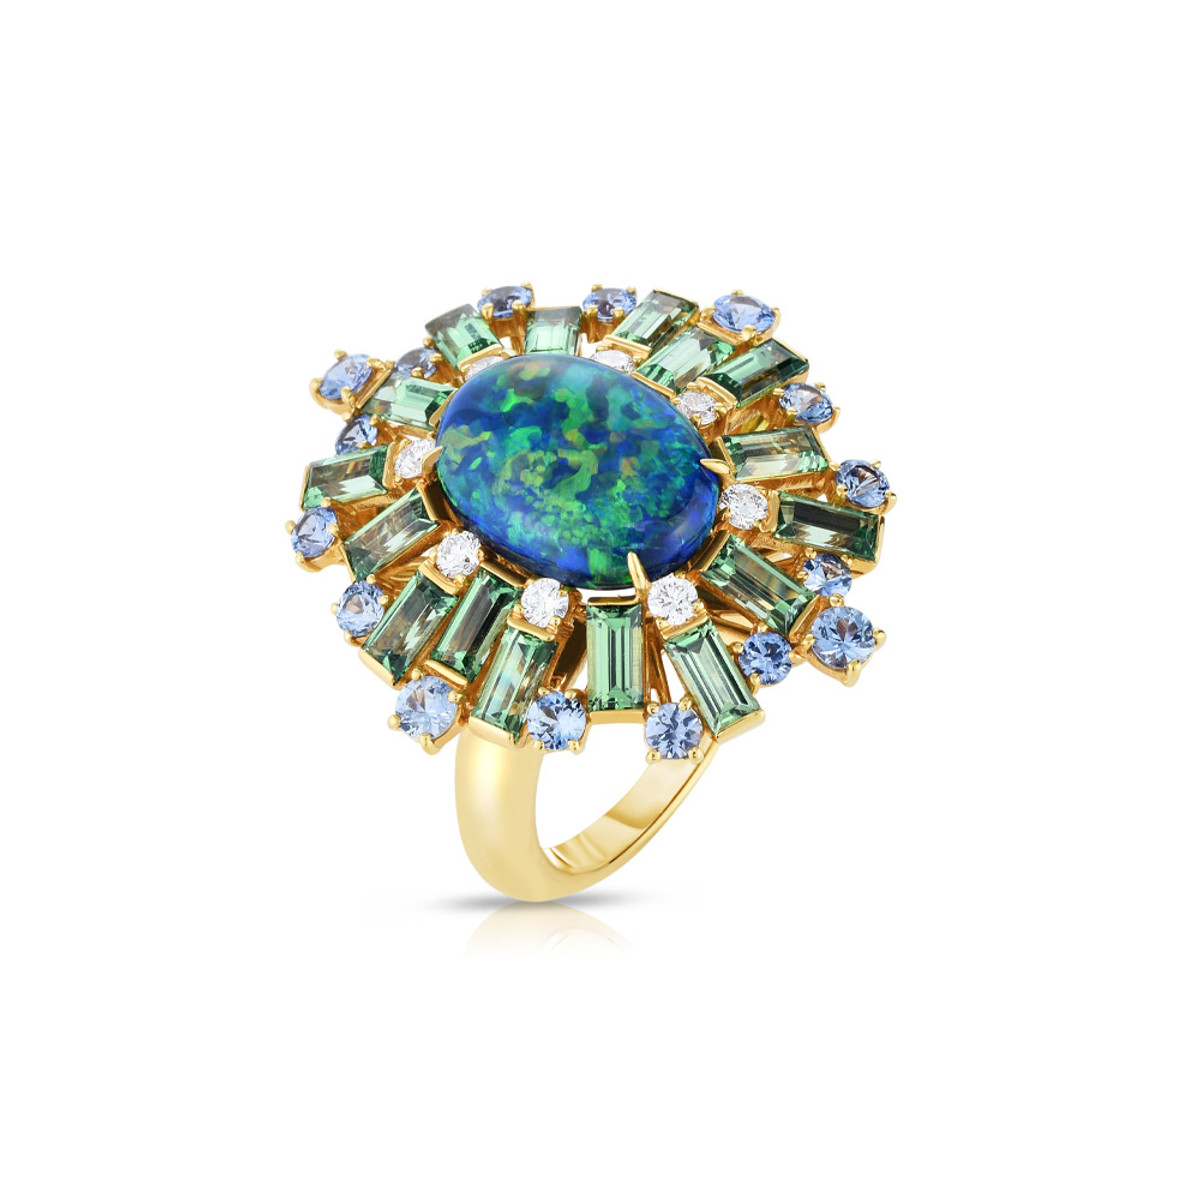 Hyde Park Collection 18K Yellow Gold Opal, Tsavorite, Sapphire and Diamond Ring-46979